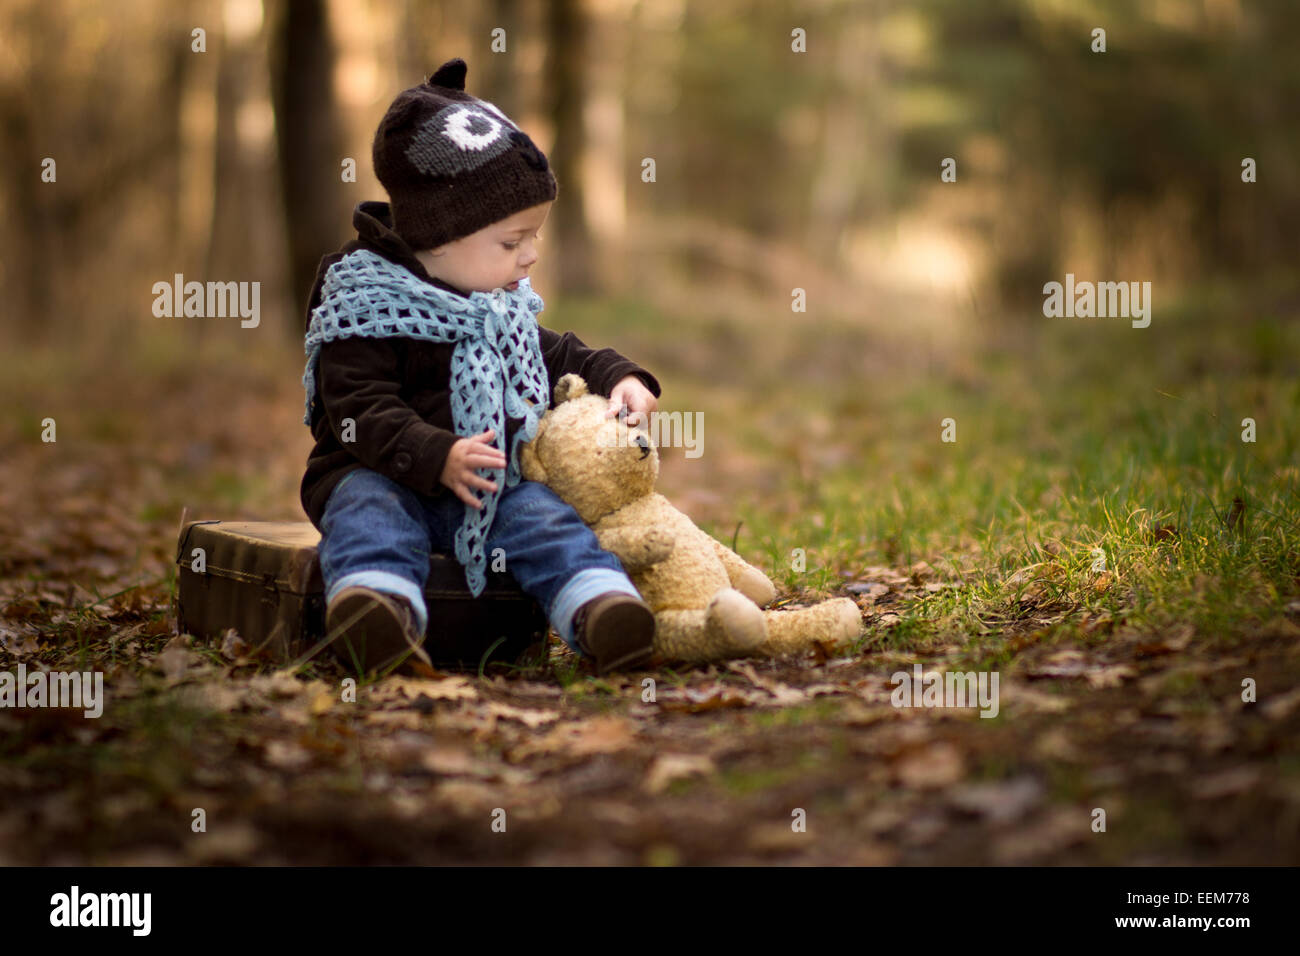 Portrait of baby boy sitting in forest with his teddy bear Stock Photo